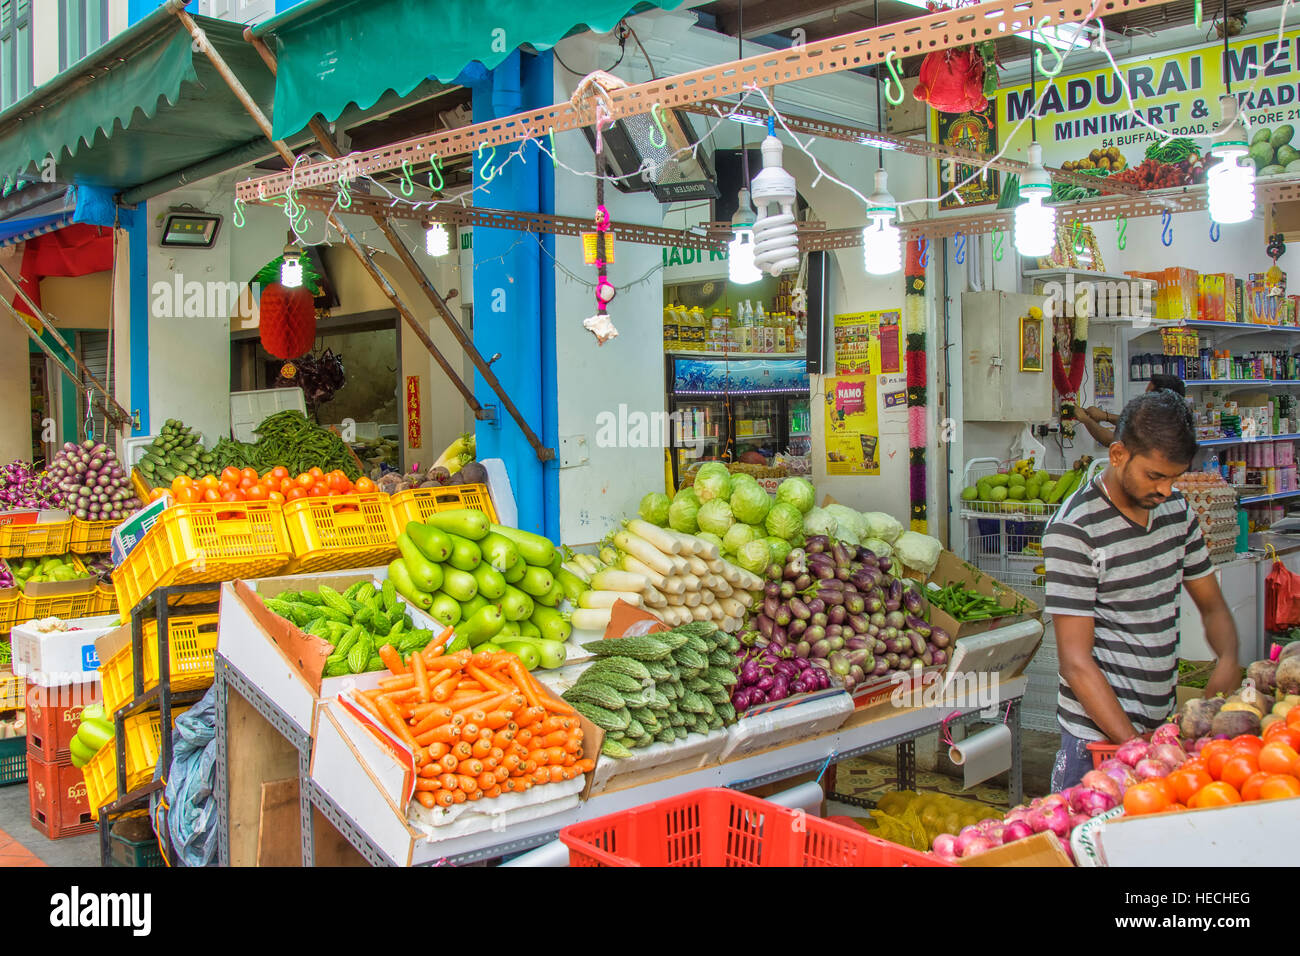 Market stall in Little India, Singapore Stock Photo